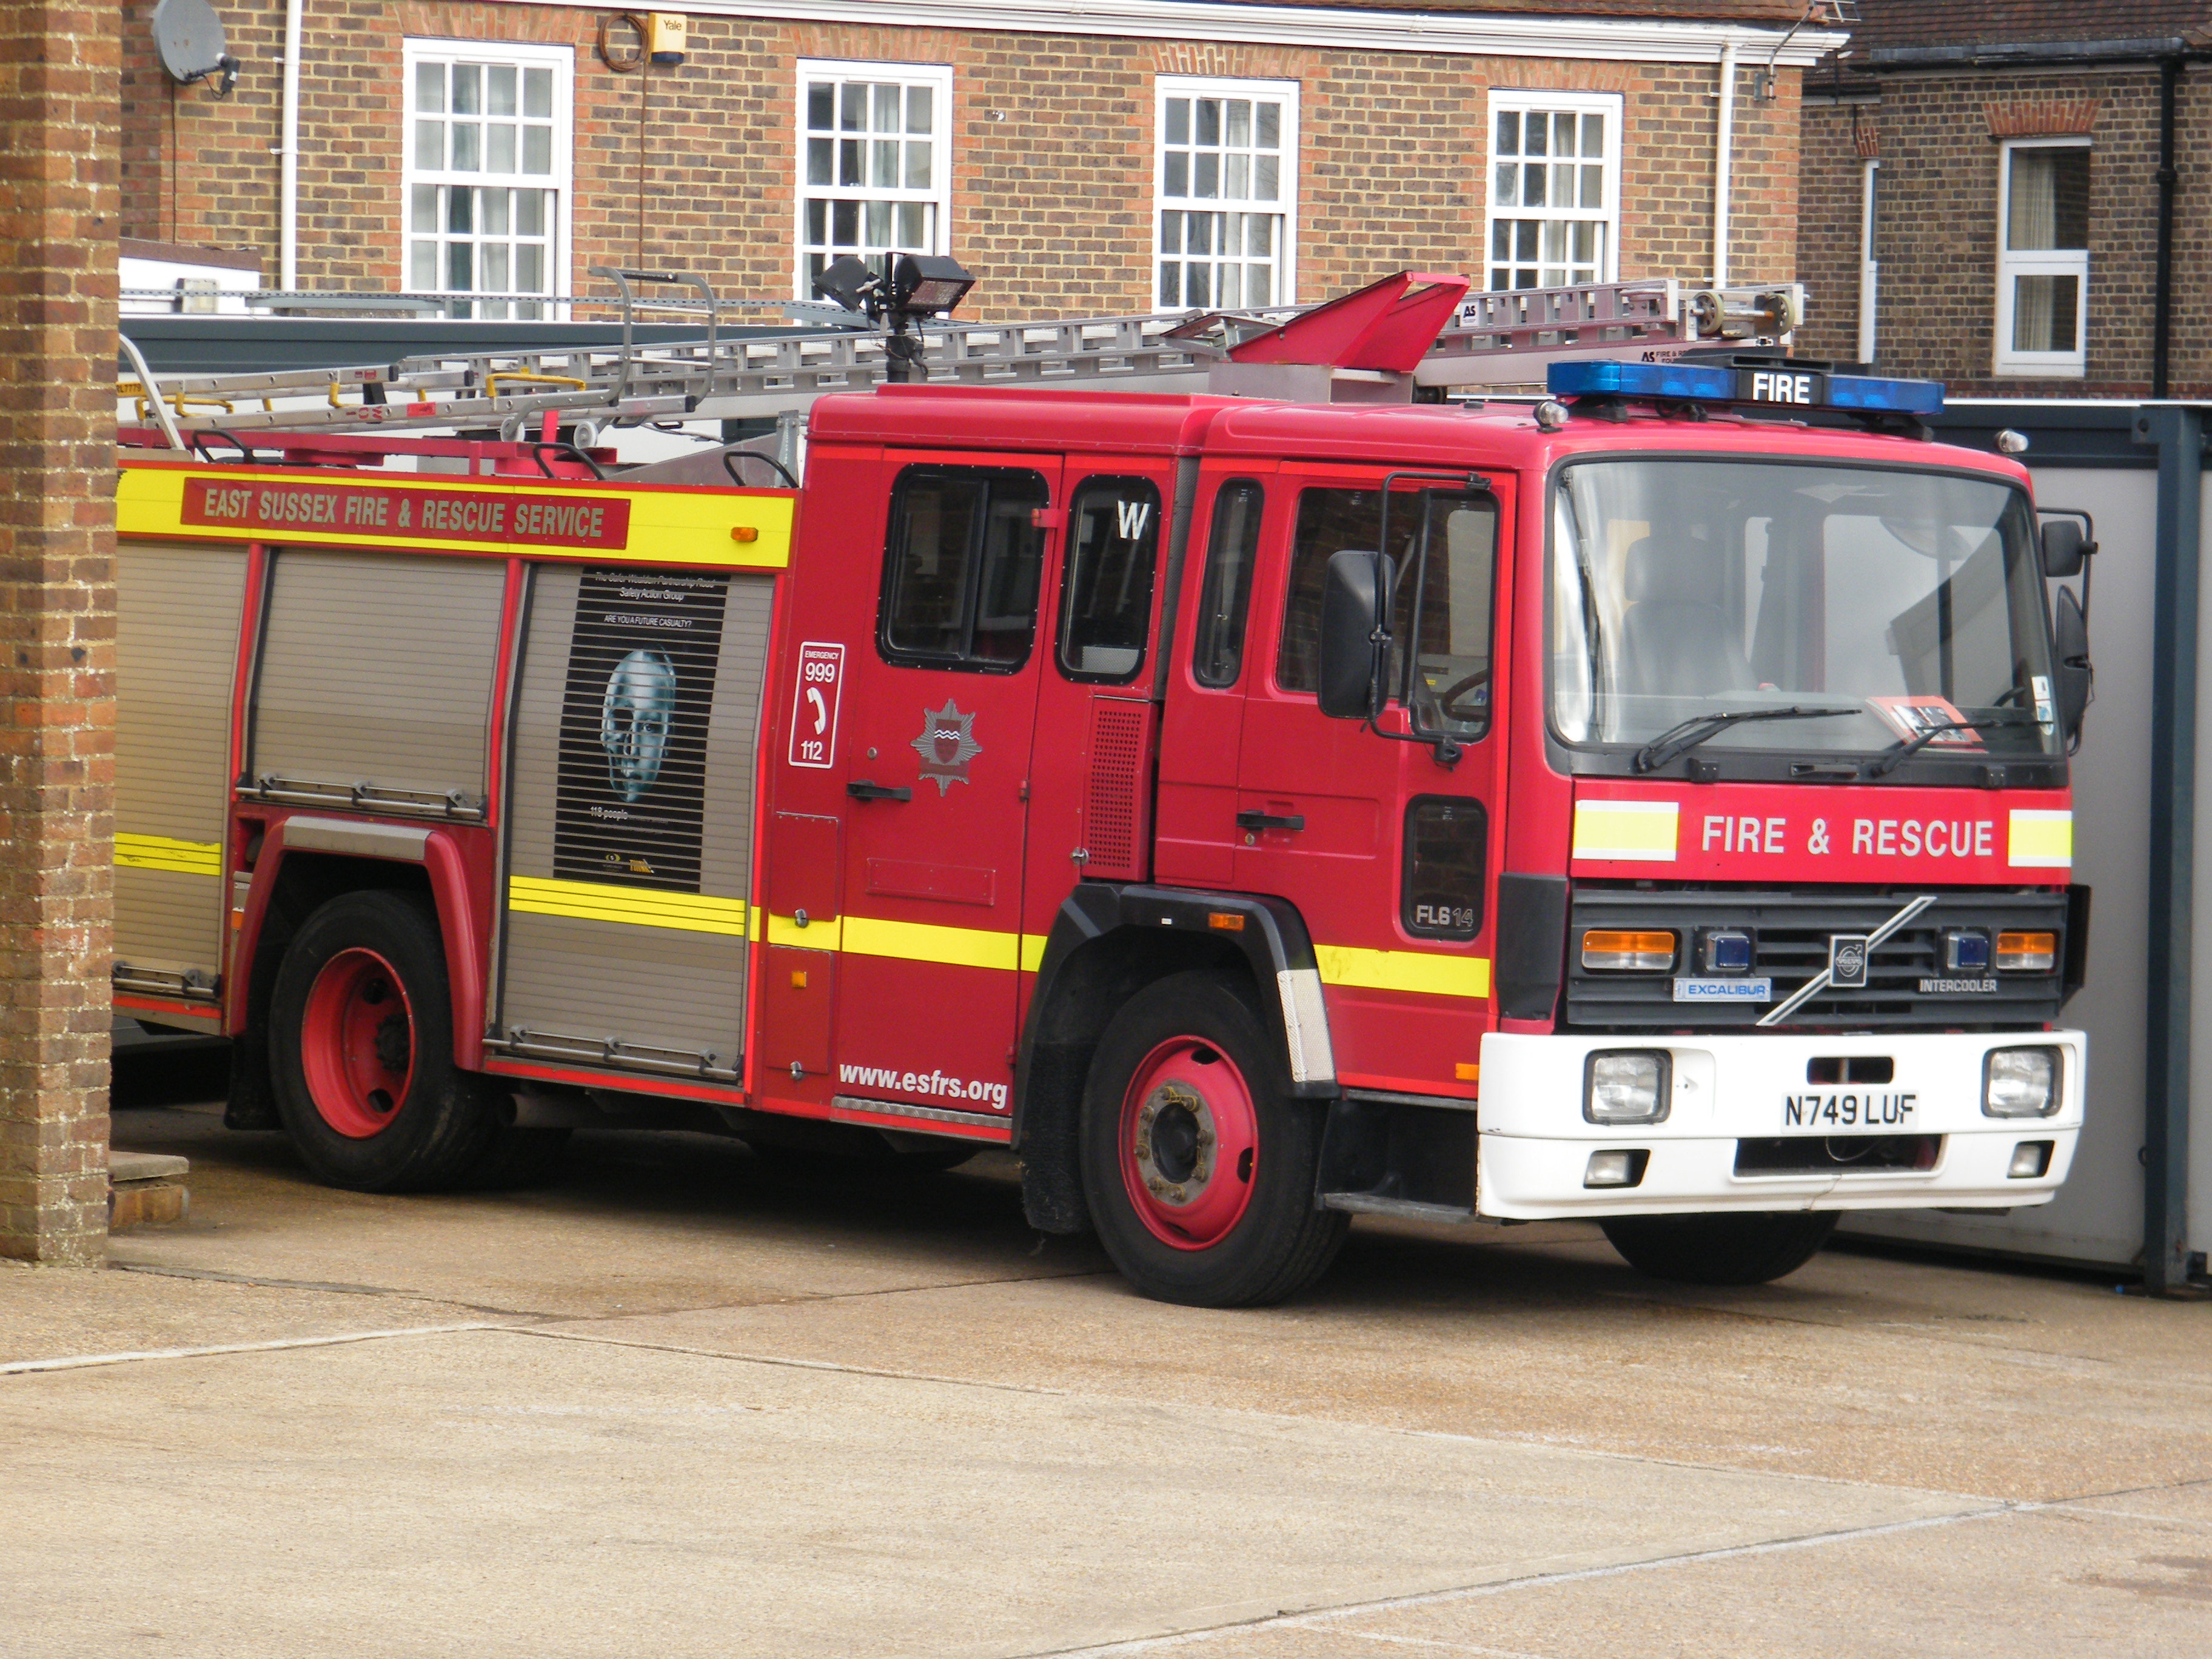 1995 Volvo FL6 14 'Excalibur' Fire Engine - East Sussex Fire and ...